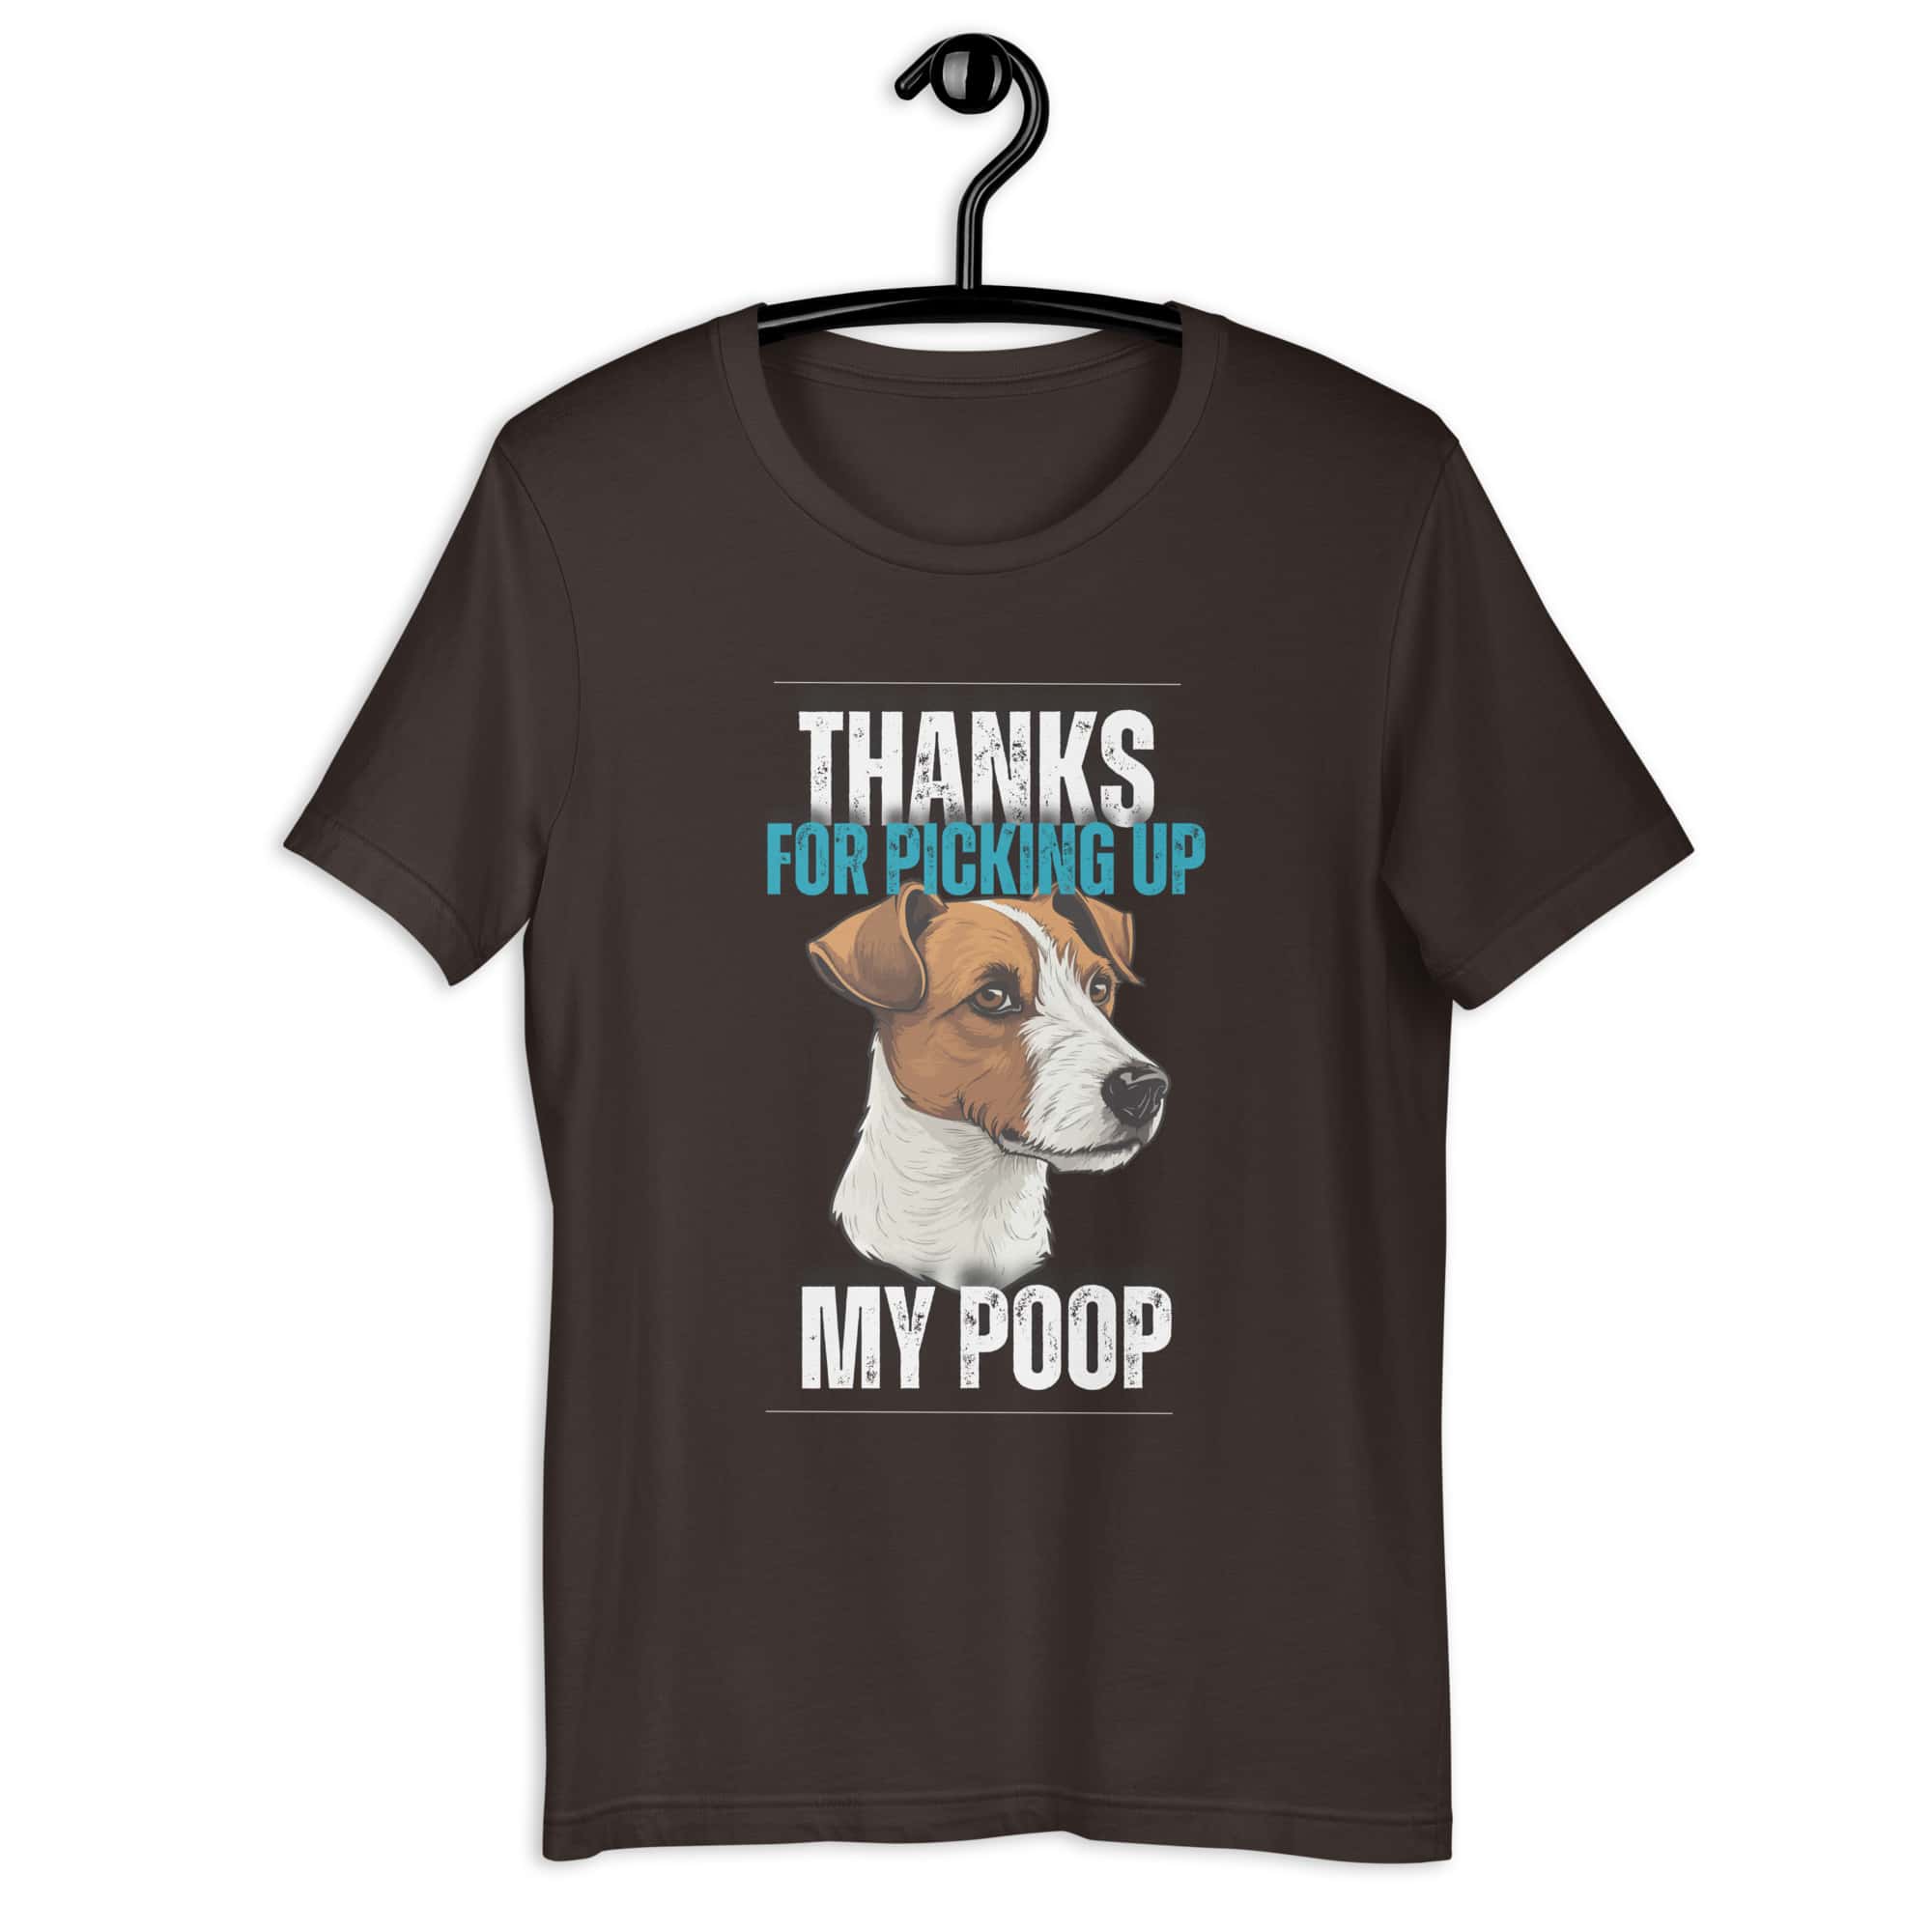 Thanks For Picking Up My POOP Funny Retrievers Unisex T-Shirt. Brown